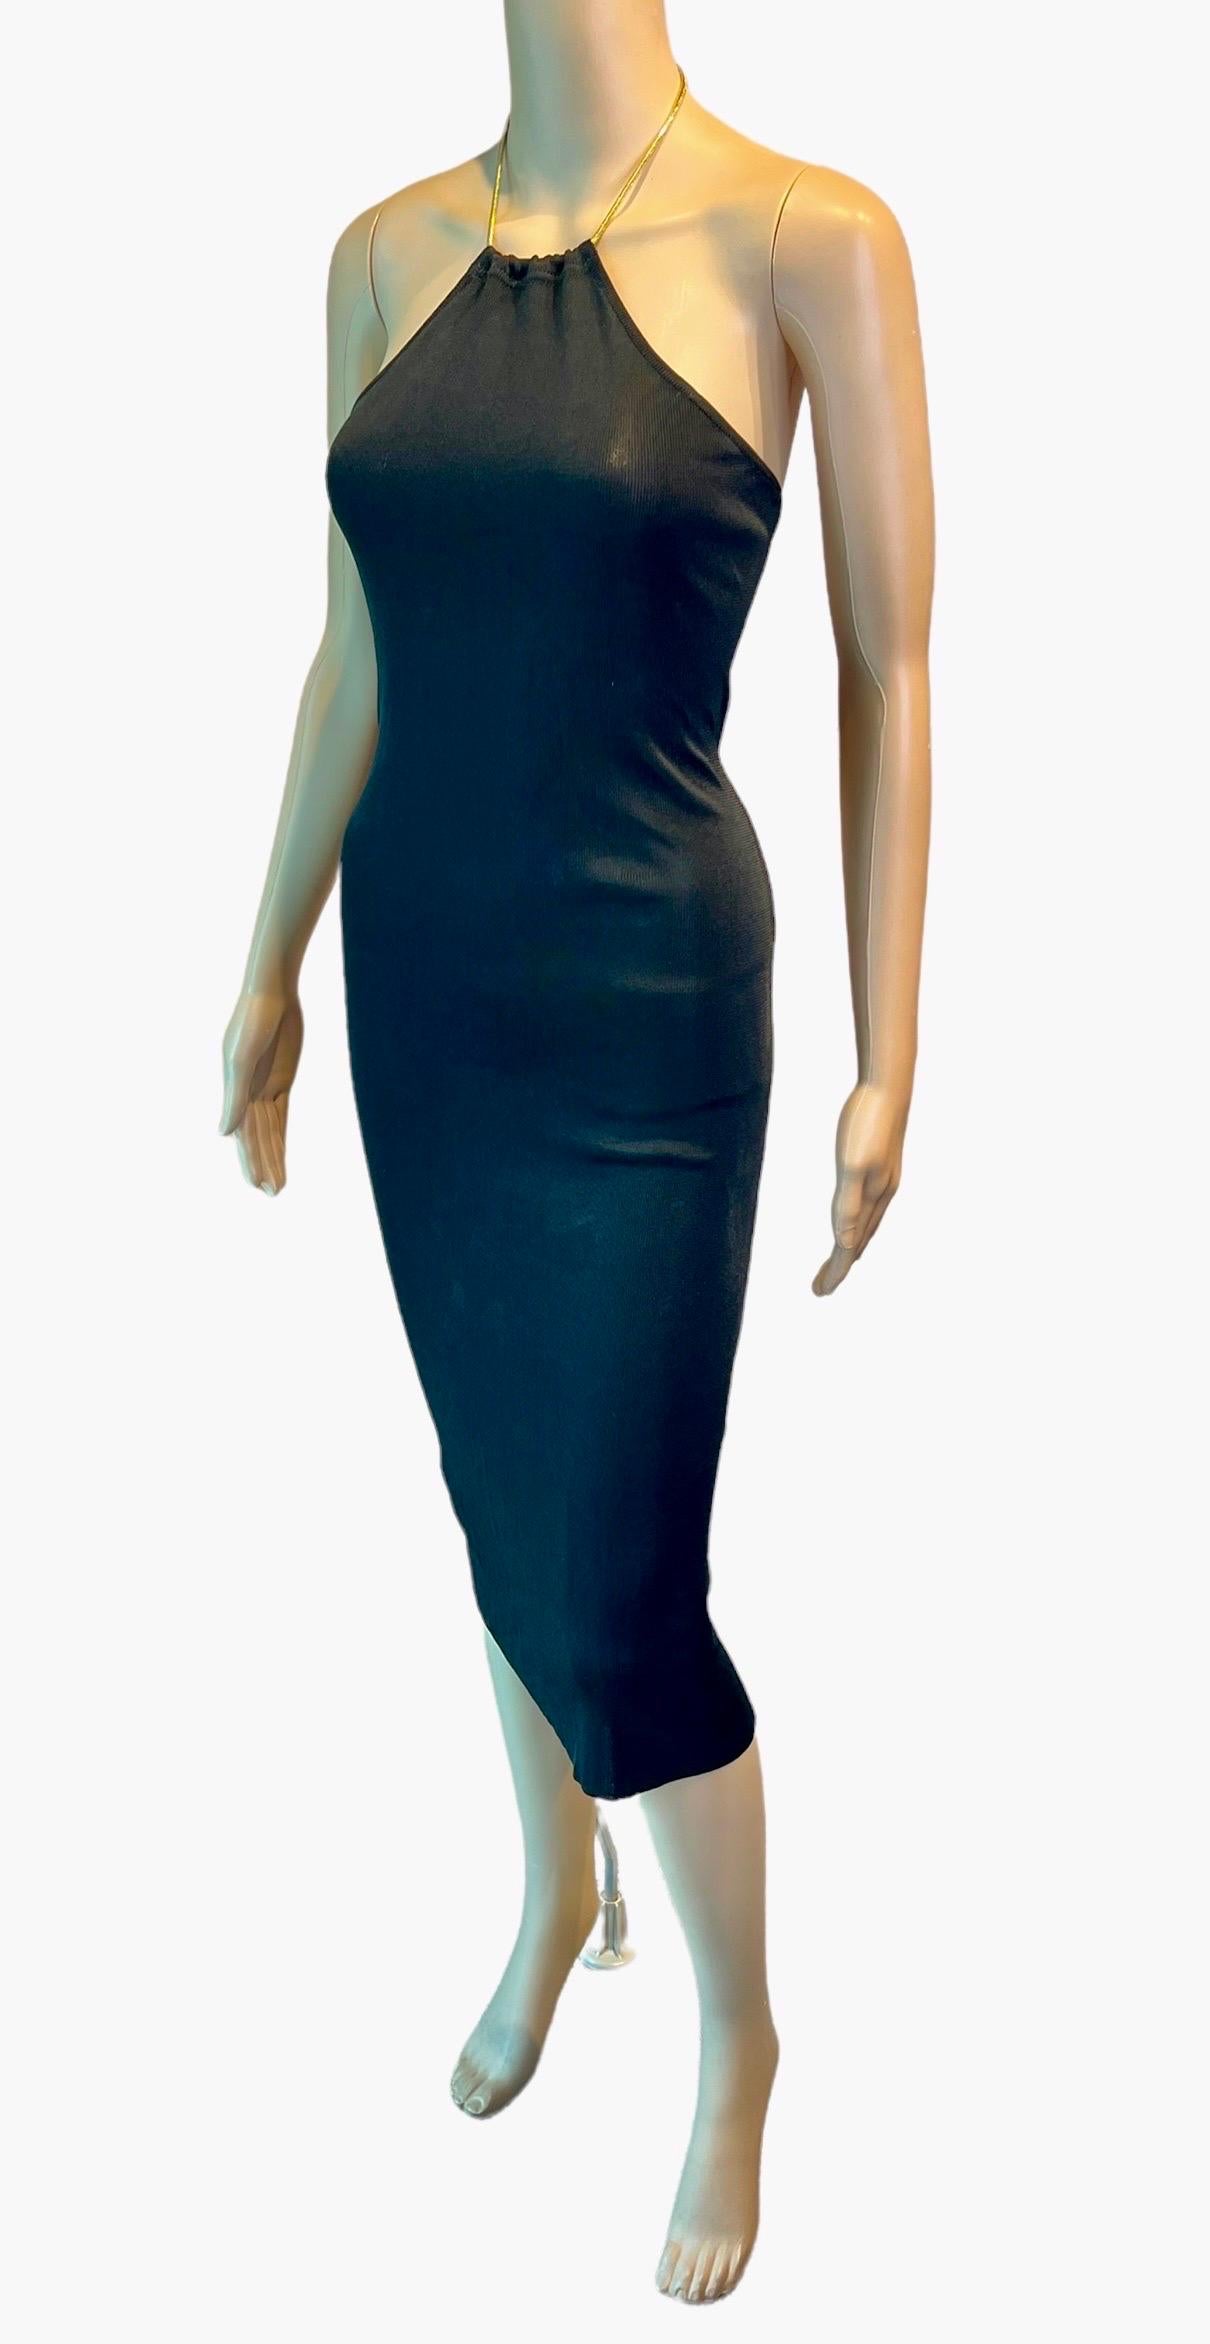 Tom Ford for Gucci F/W 1996 Chain Halter Cutout Bodycon Knit Black Midi Dress

Please note size tag has been removed.


